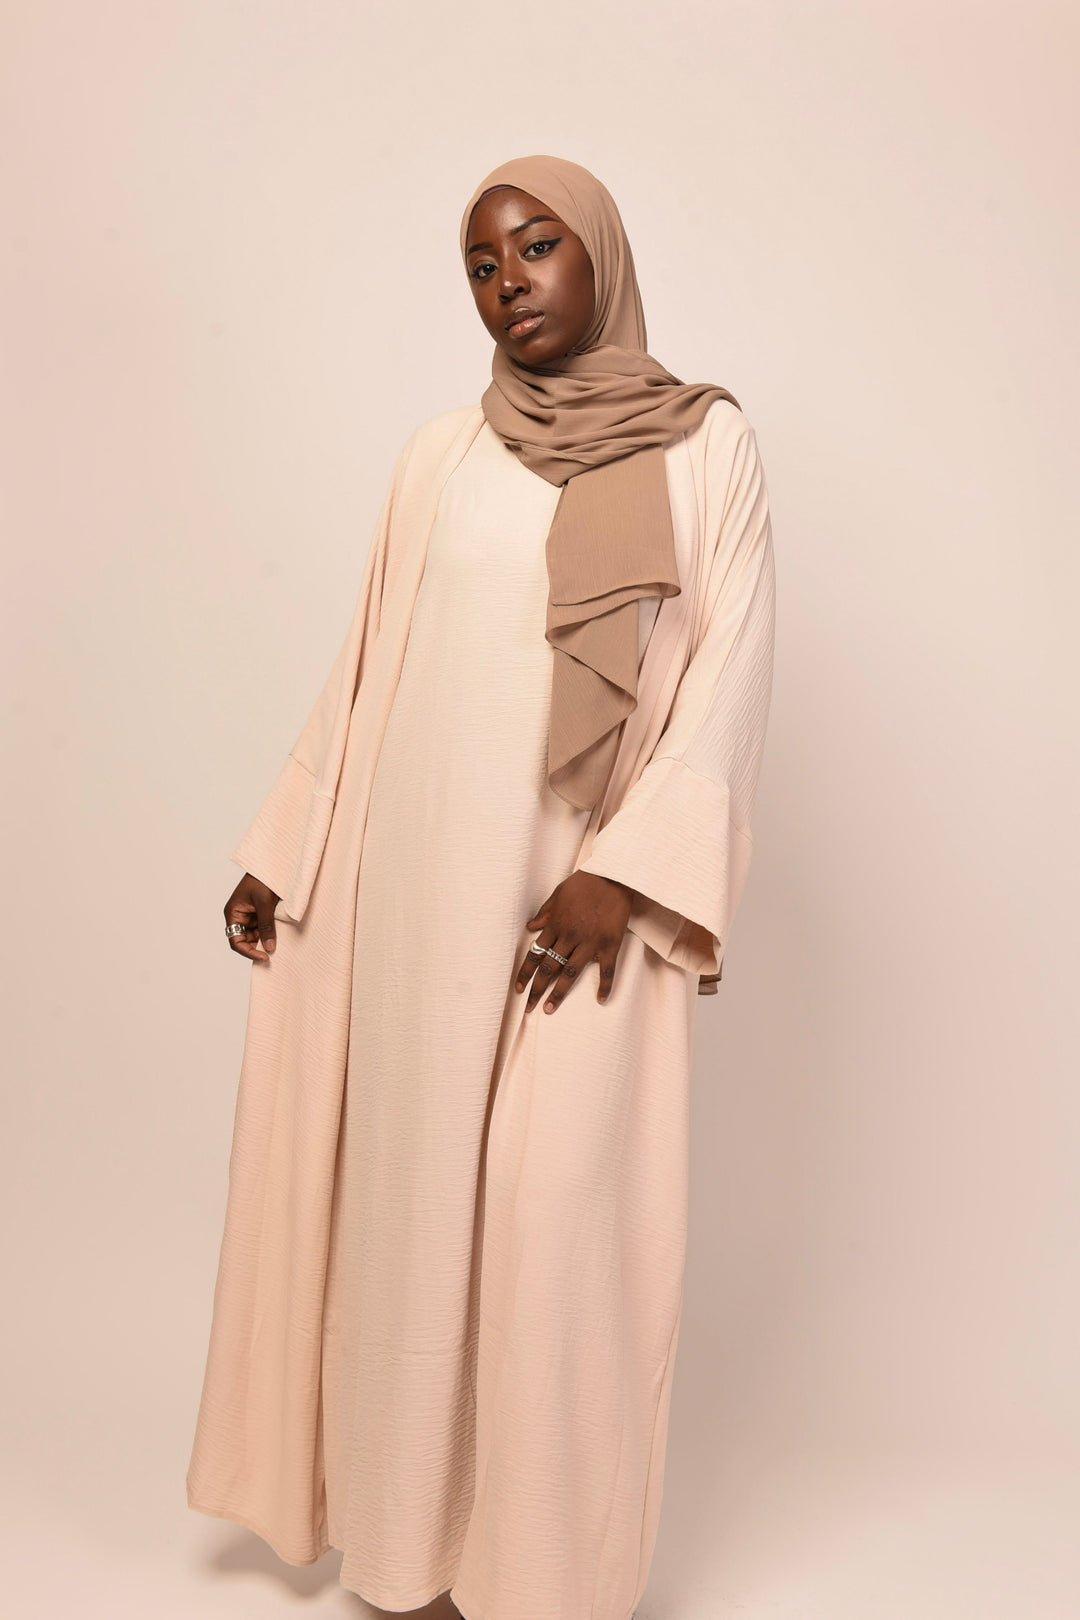 Get trendy with Lea 2-Piece Abaya Set - Beige -  available at Voilee NY. Grab yours for $74.90 today!